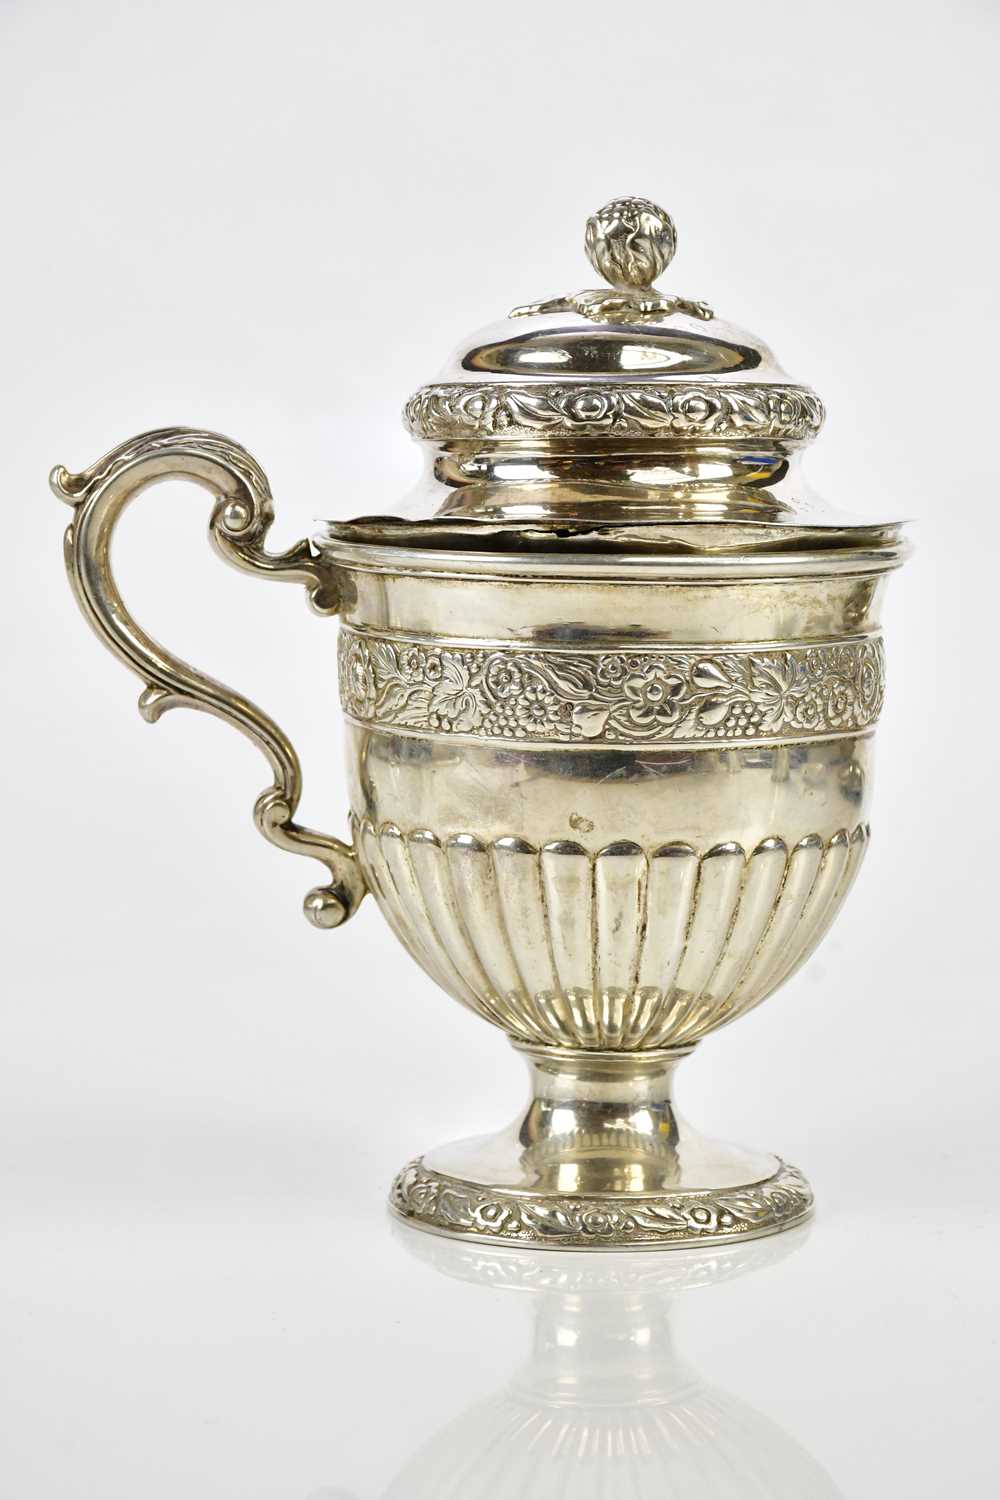 PITTAR & CO, CALCUTTA; a 19th century colonial silver cup and cover, the cover case with an open